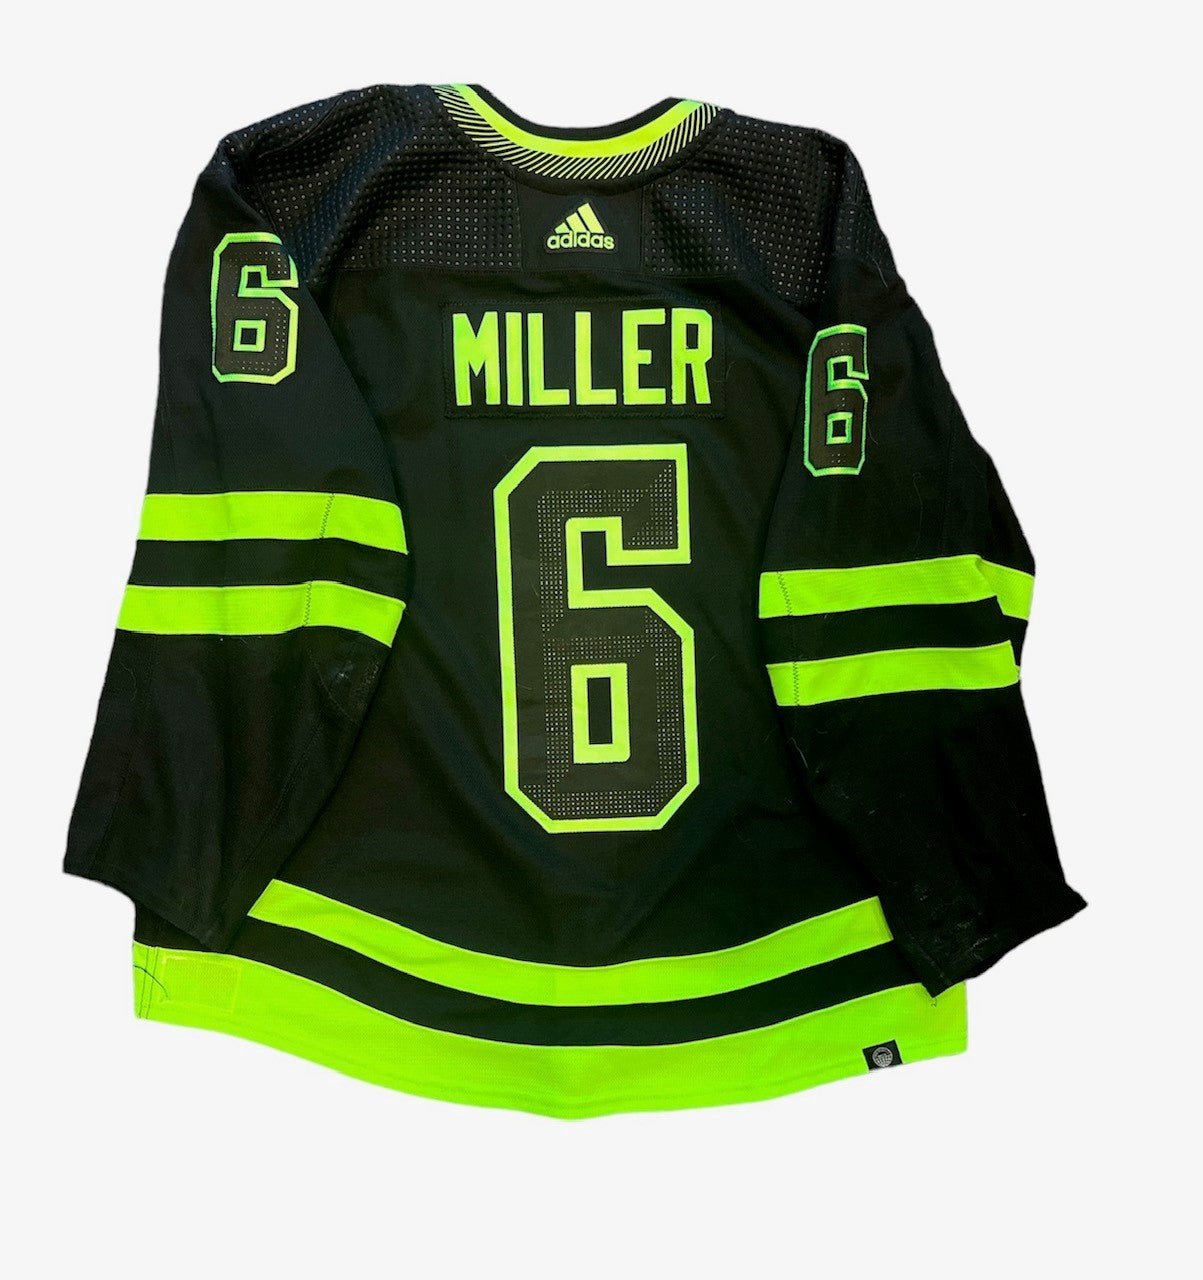 COLIN MILLER 2022-23 GAME WORN BLACKOUT JERSEY - BACK VIEW